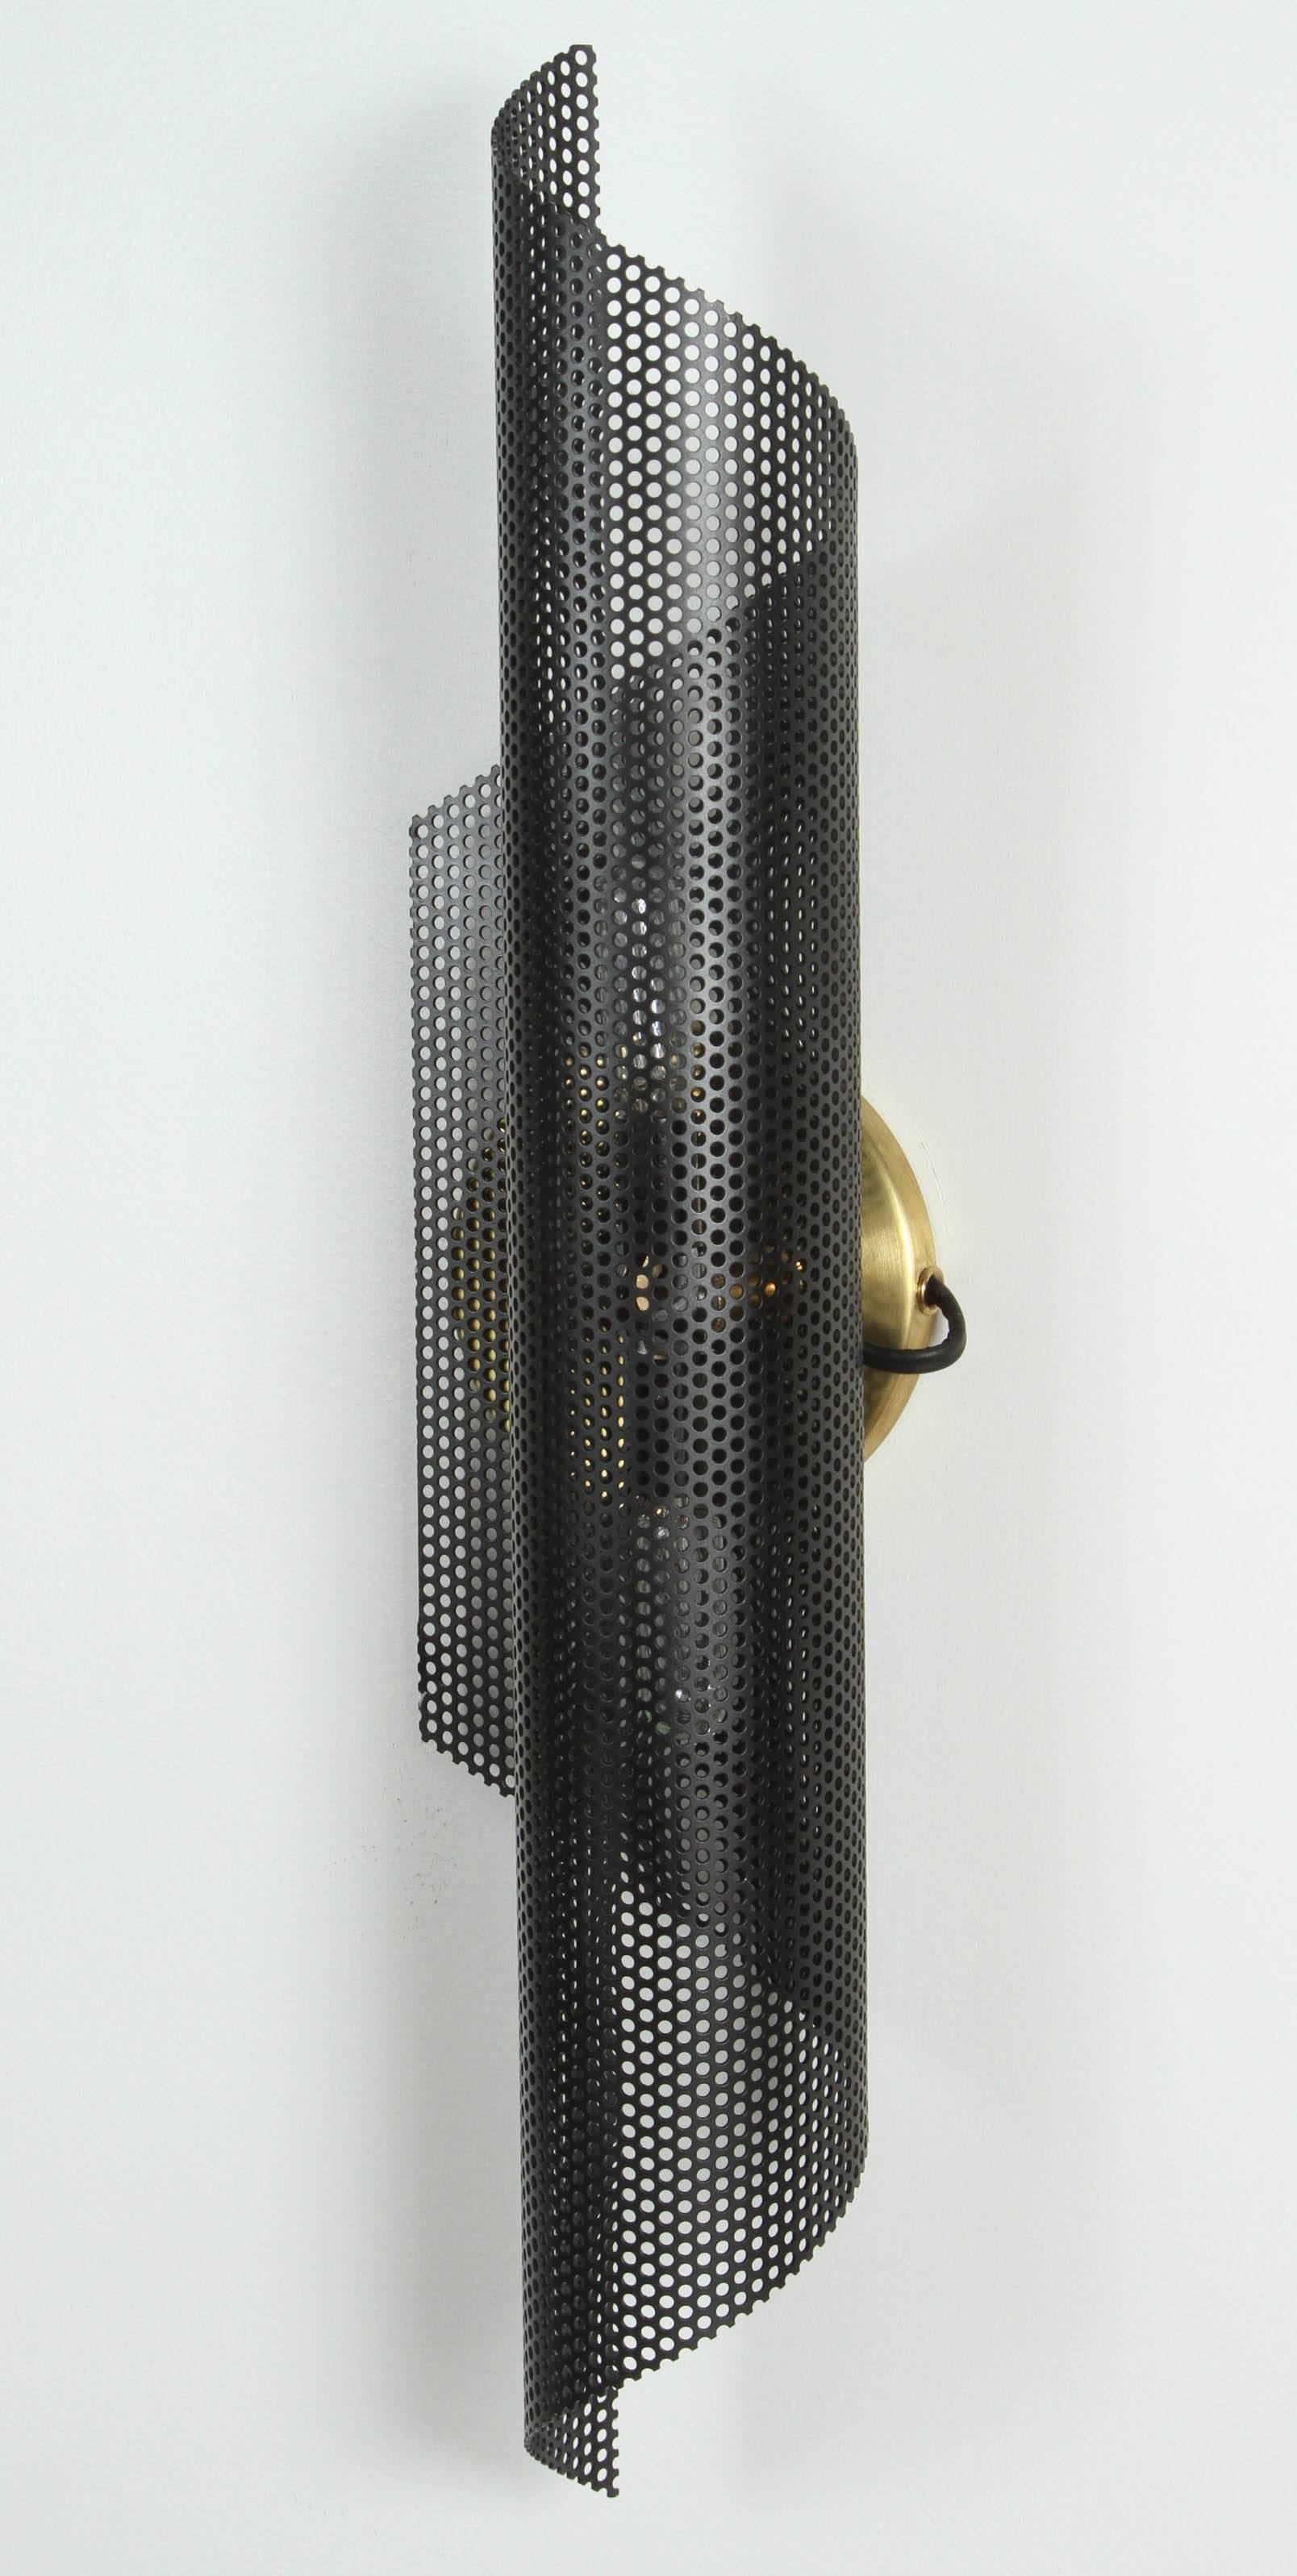 Contemporary Rolled Perforated Sconce by Lawson-Fenning